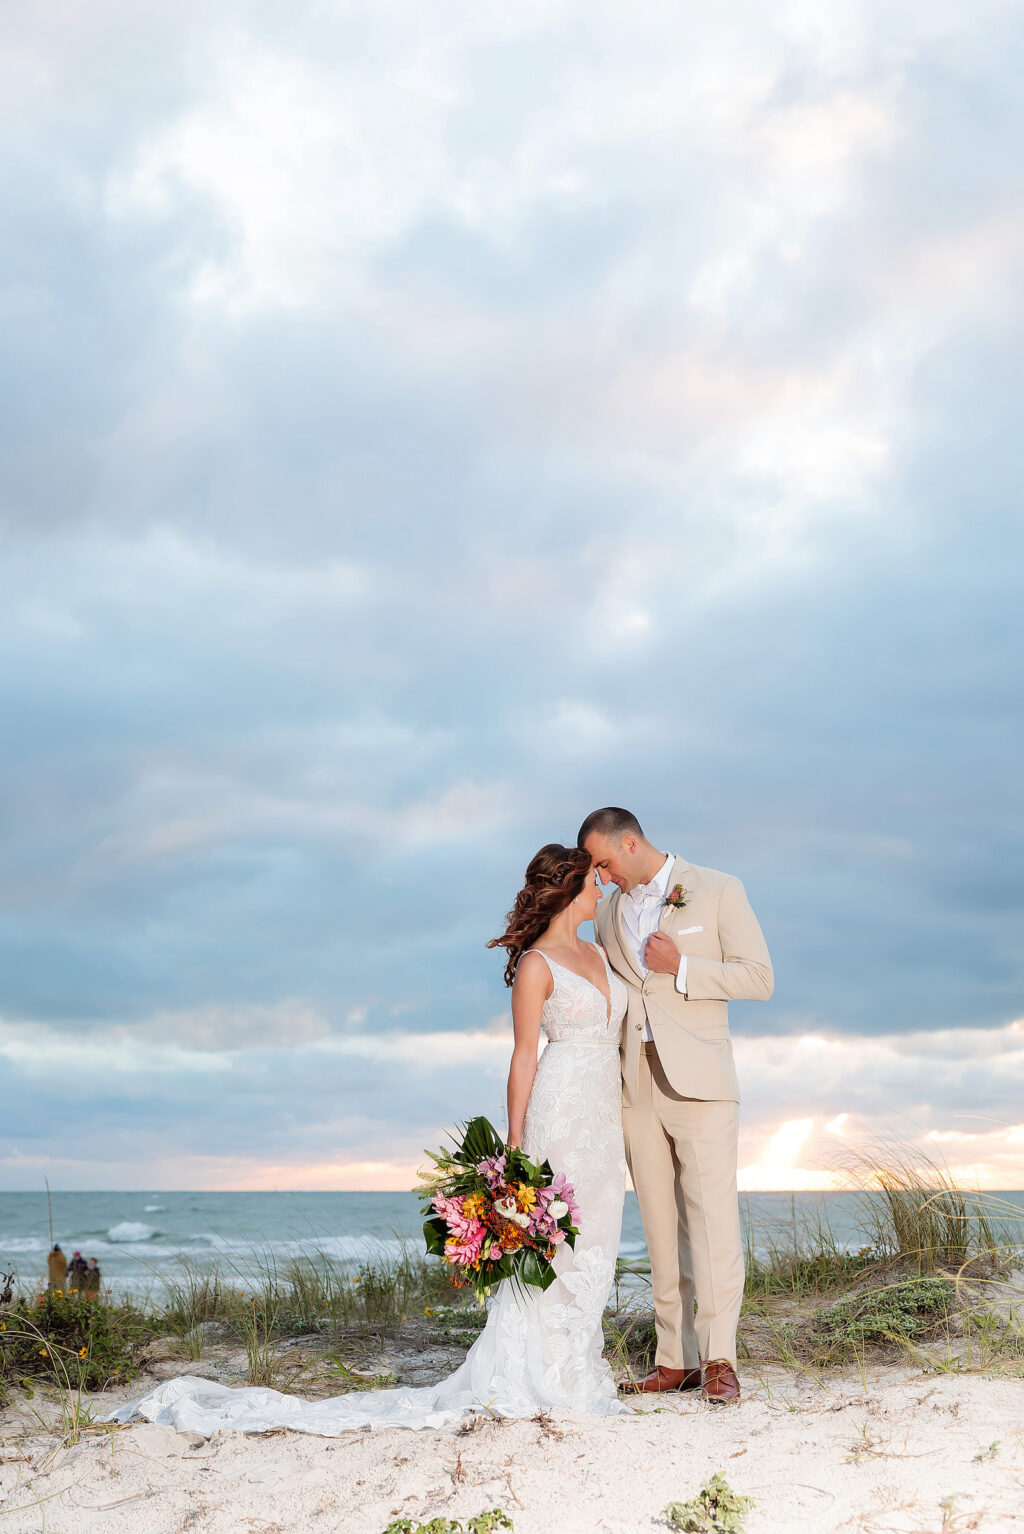 Tropical Clearwater Beach Intimate Bride with Braided Crown Half Up Hairdo and Groom Wedding Portrait on Beach | Tampa Bay Wedding Photographer Limelight Photography